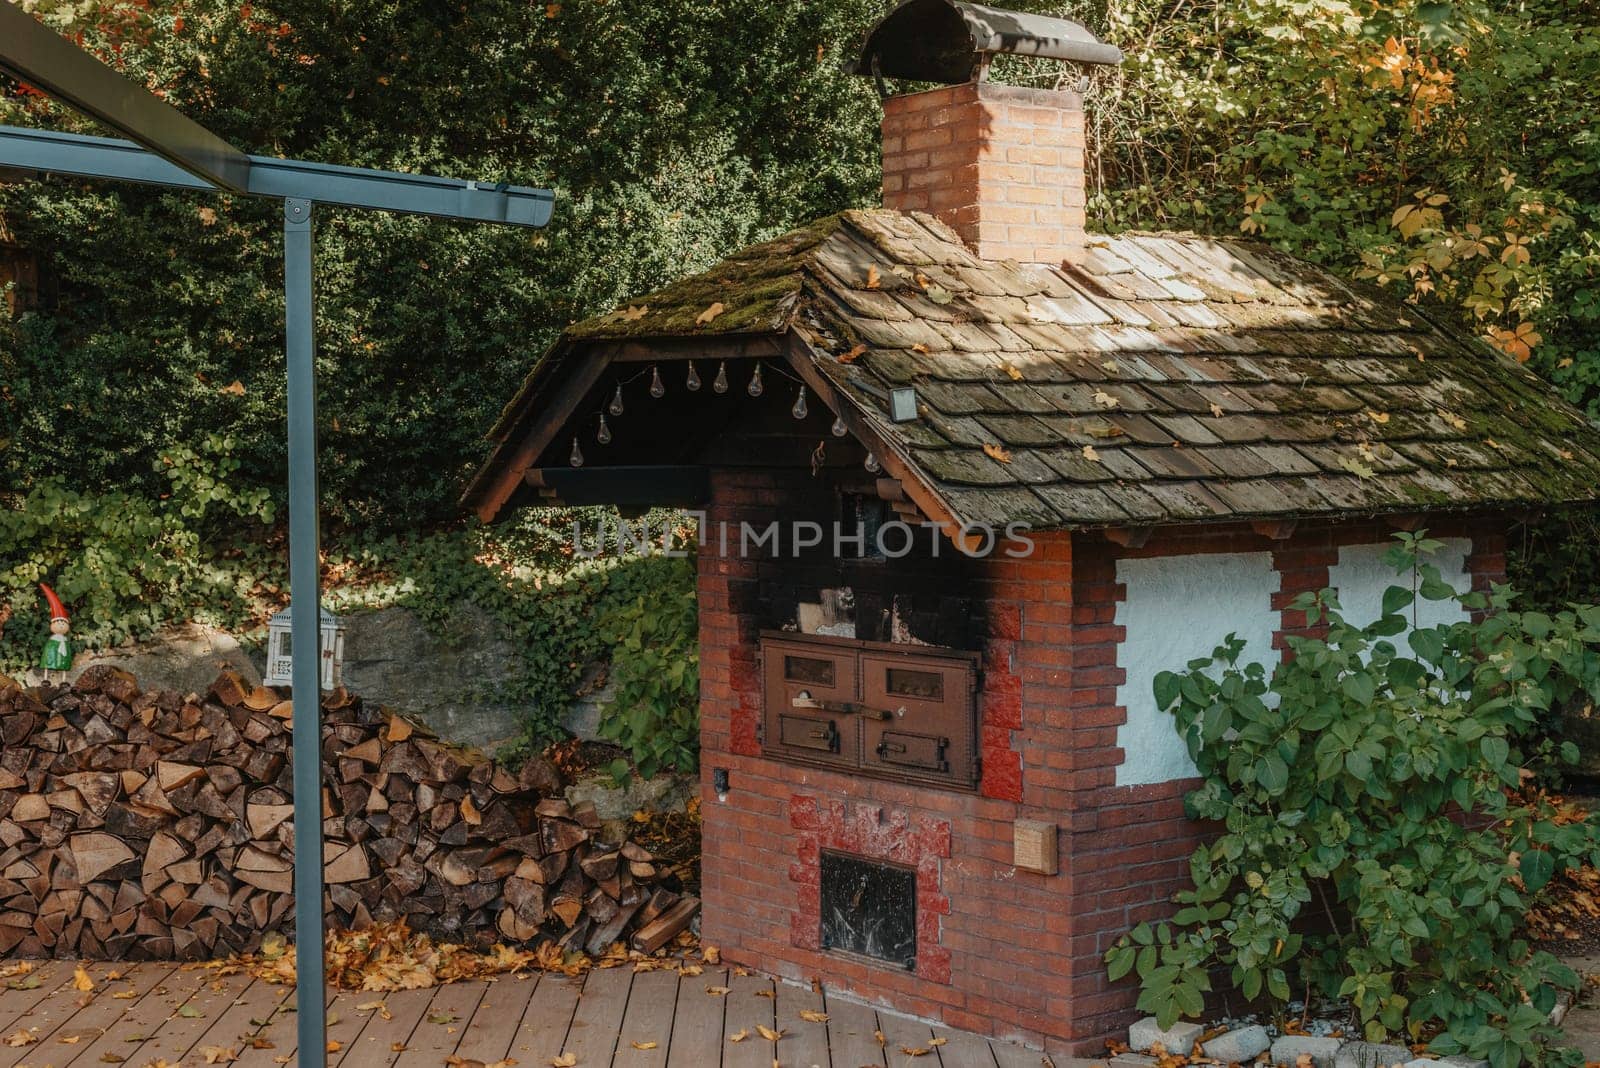 An Old Stove And Firewood For It In The Yard In The Village. Old Stone Fireplace Outdoors In The Fall. Traditional Brick Oven With Wood For Baking Bread Outdoor In Europe. by Andrii_Ko